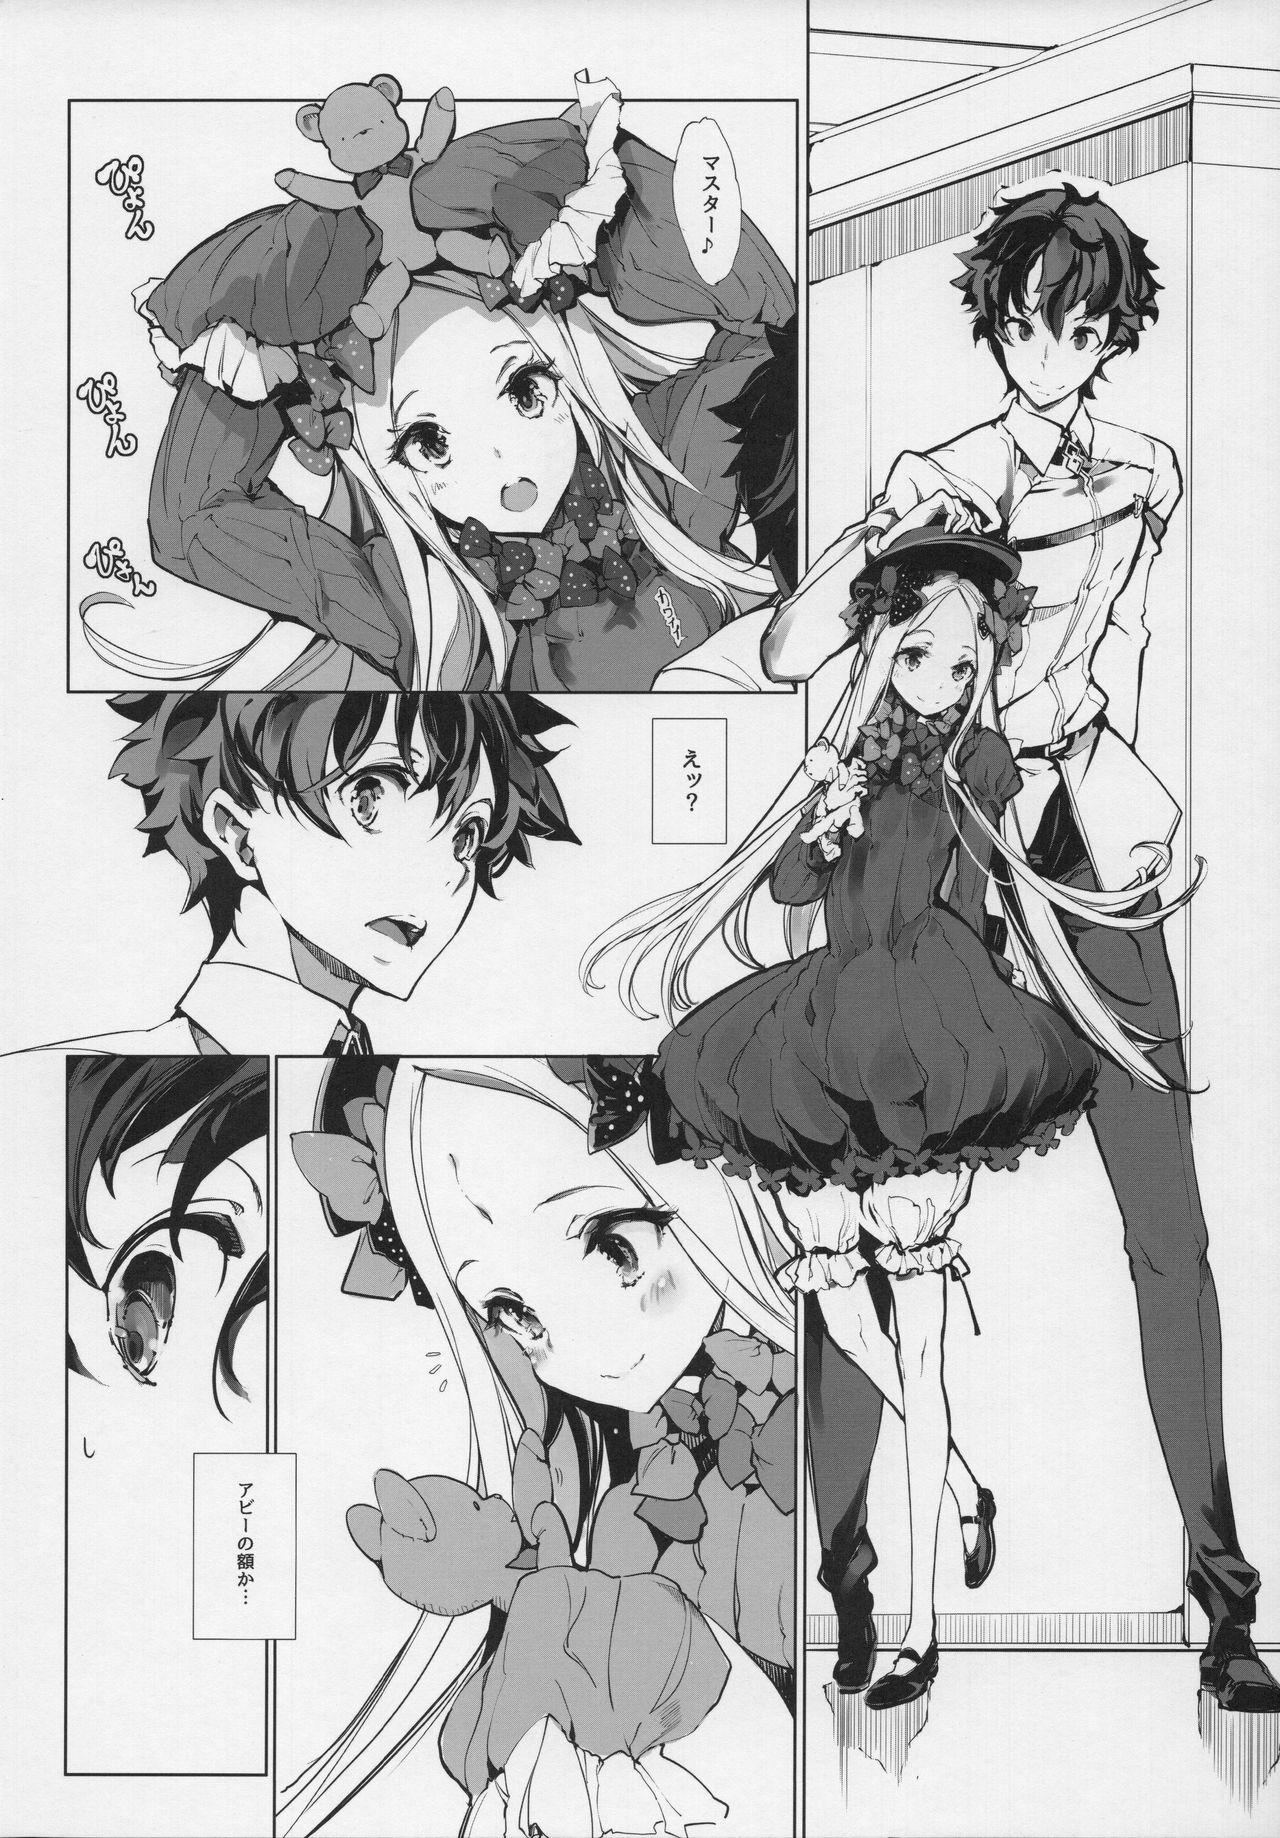 Harcore Sen no Ko o Haramu Mori no Shoujo - The girl of the woods with a thousand young - Fate grand order Con - Page 3